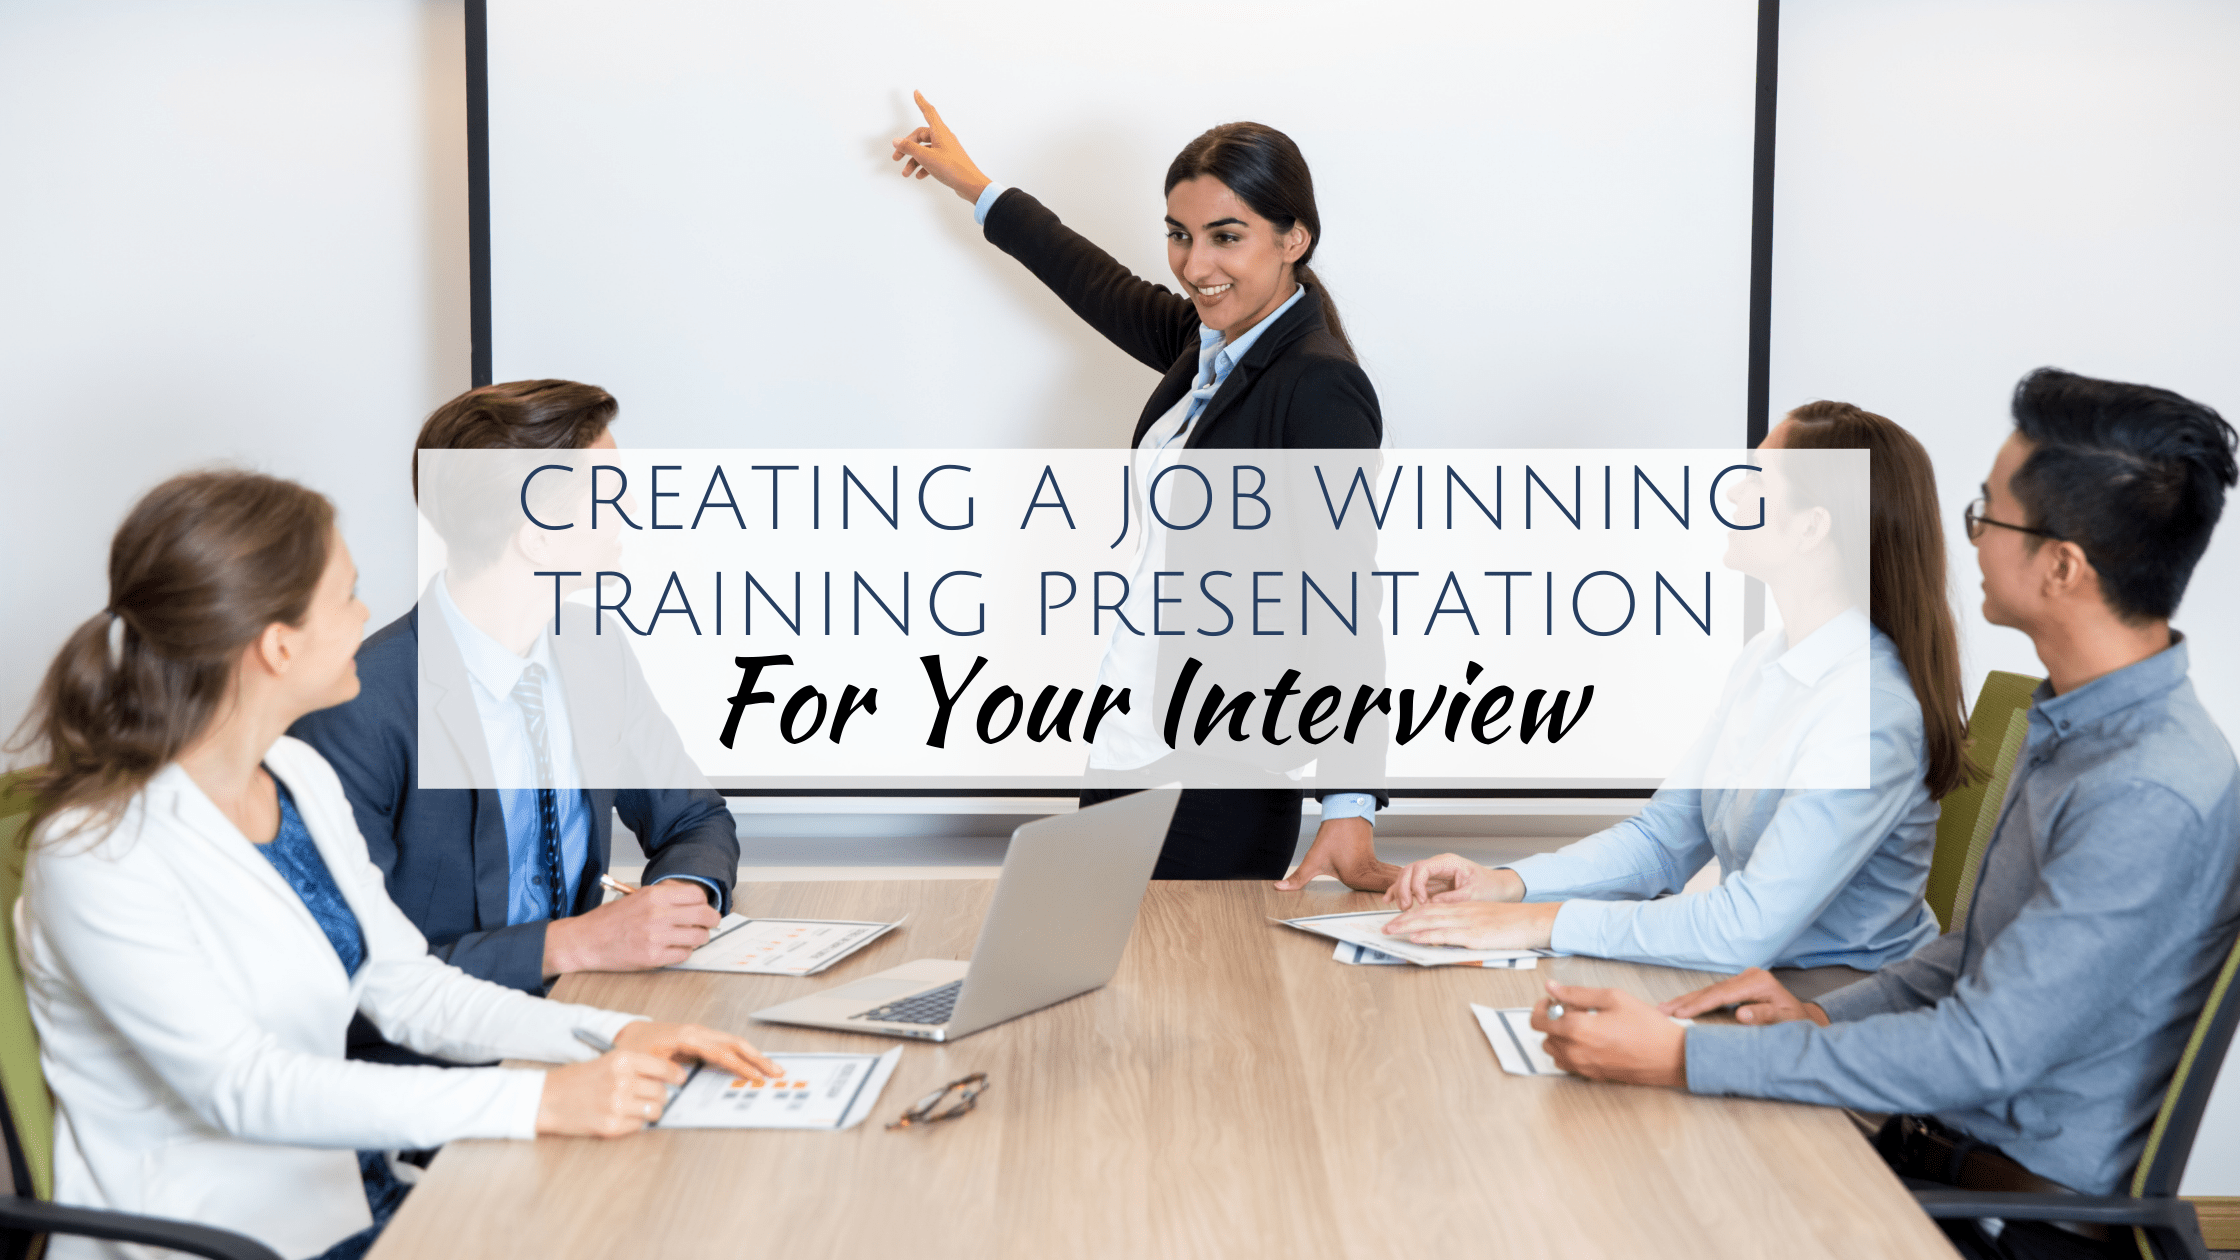 presentation ideas for training interview